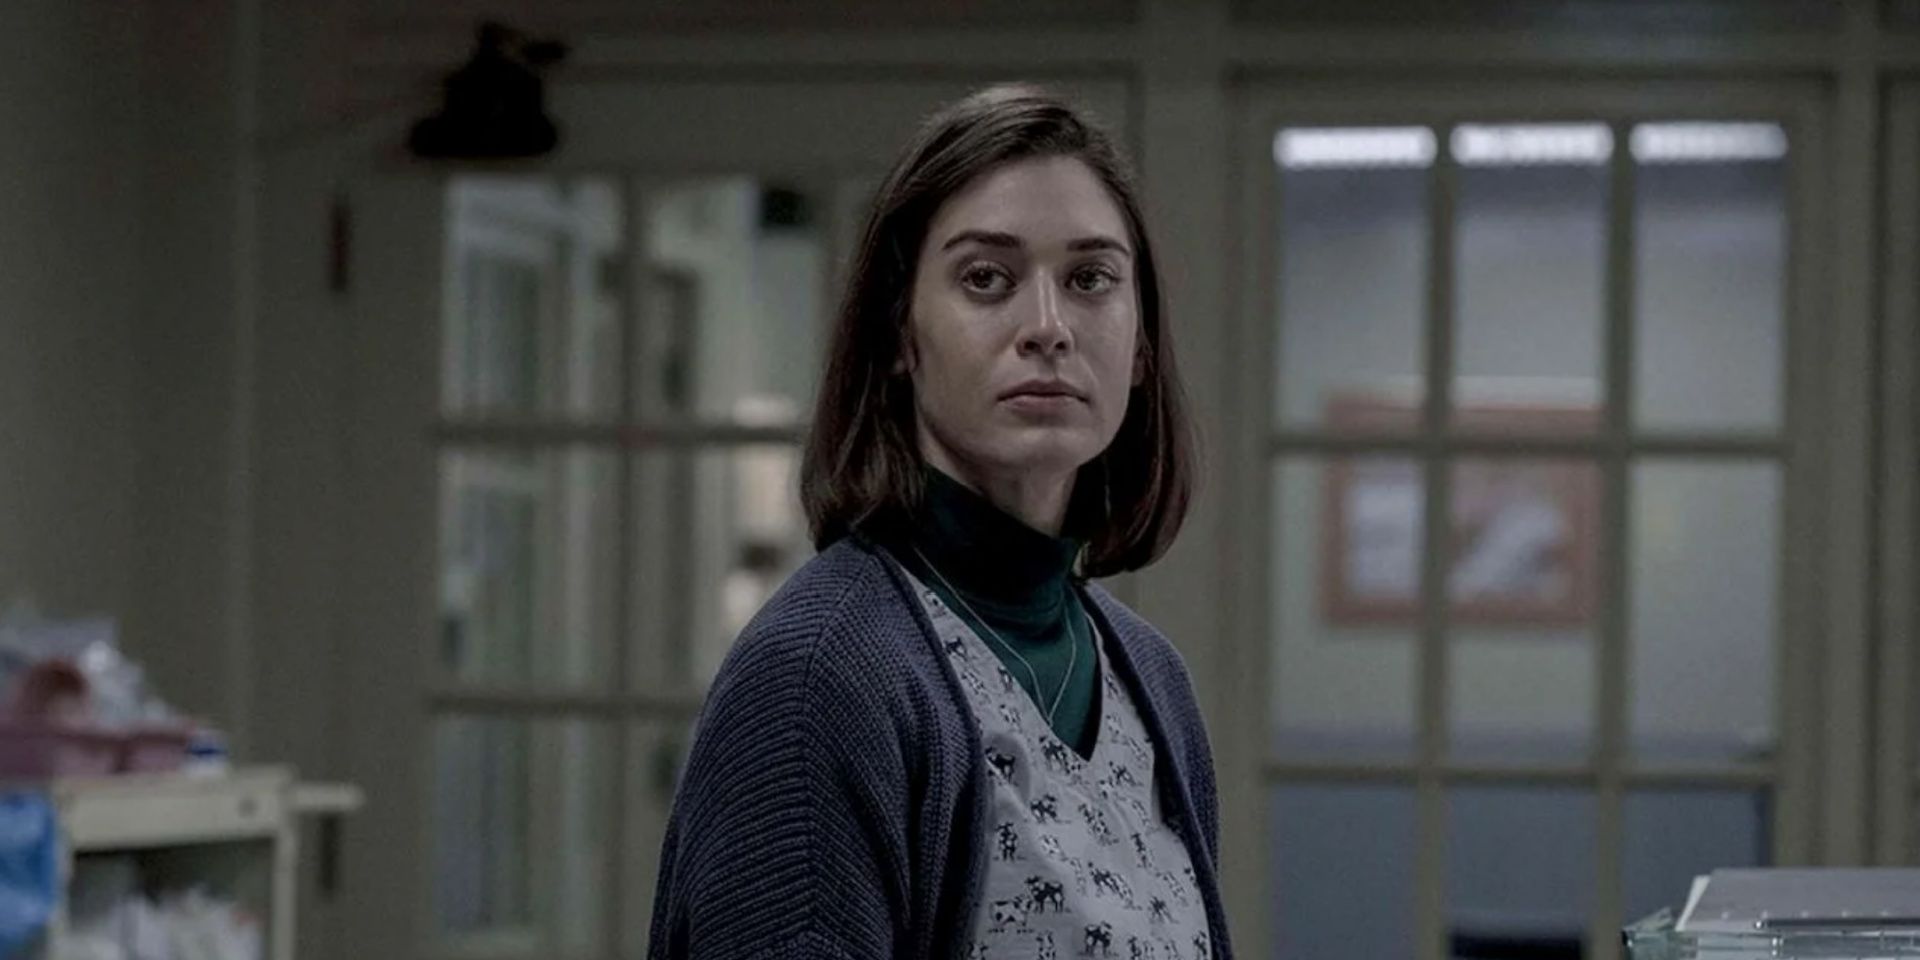 Lizzy Caplan as a young Annie Wilkes in Castle Rock season 2